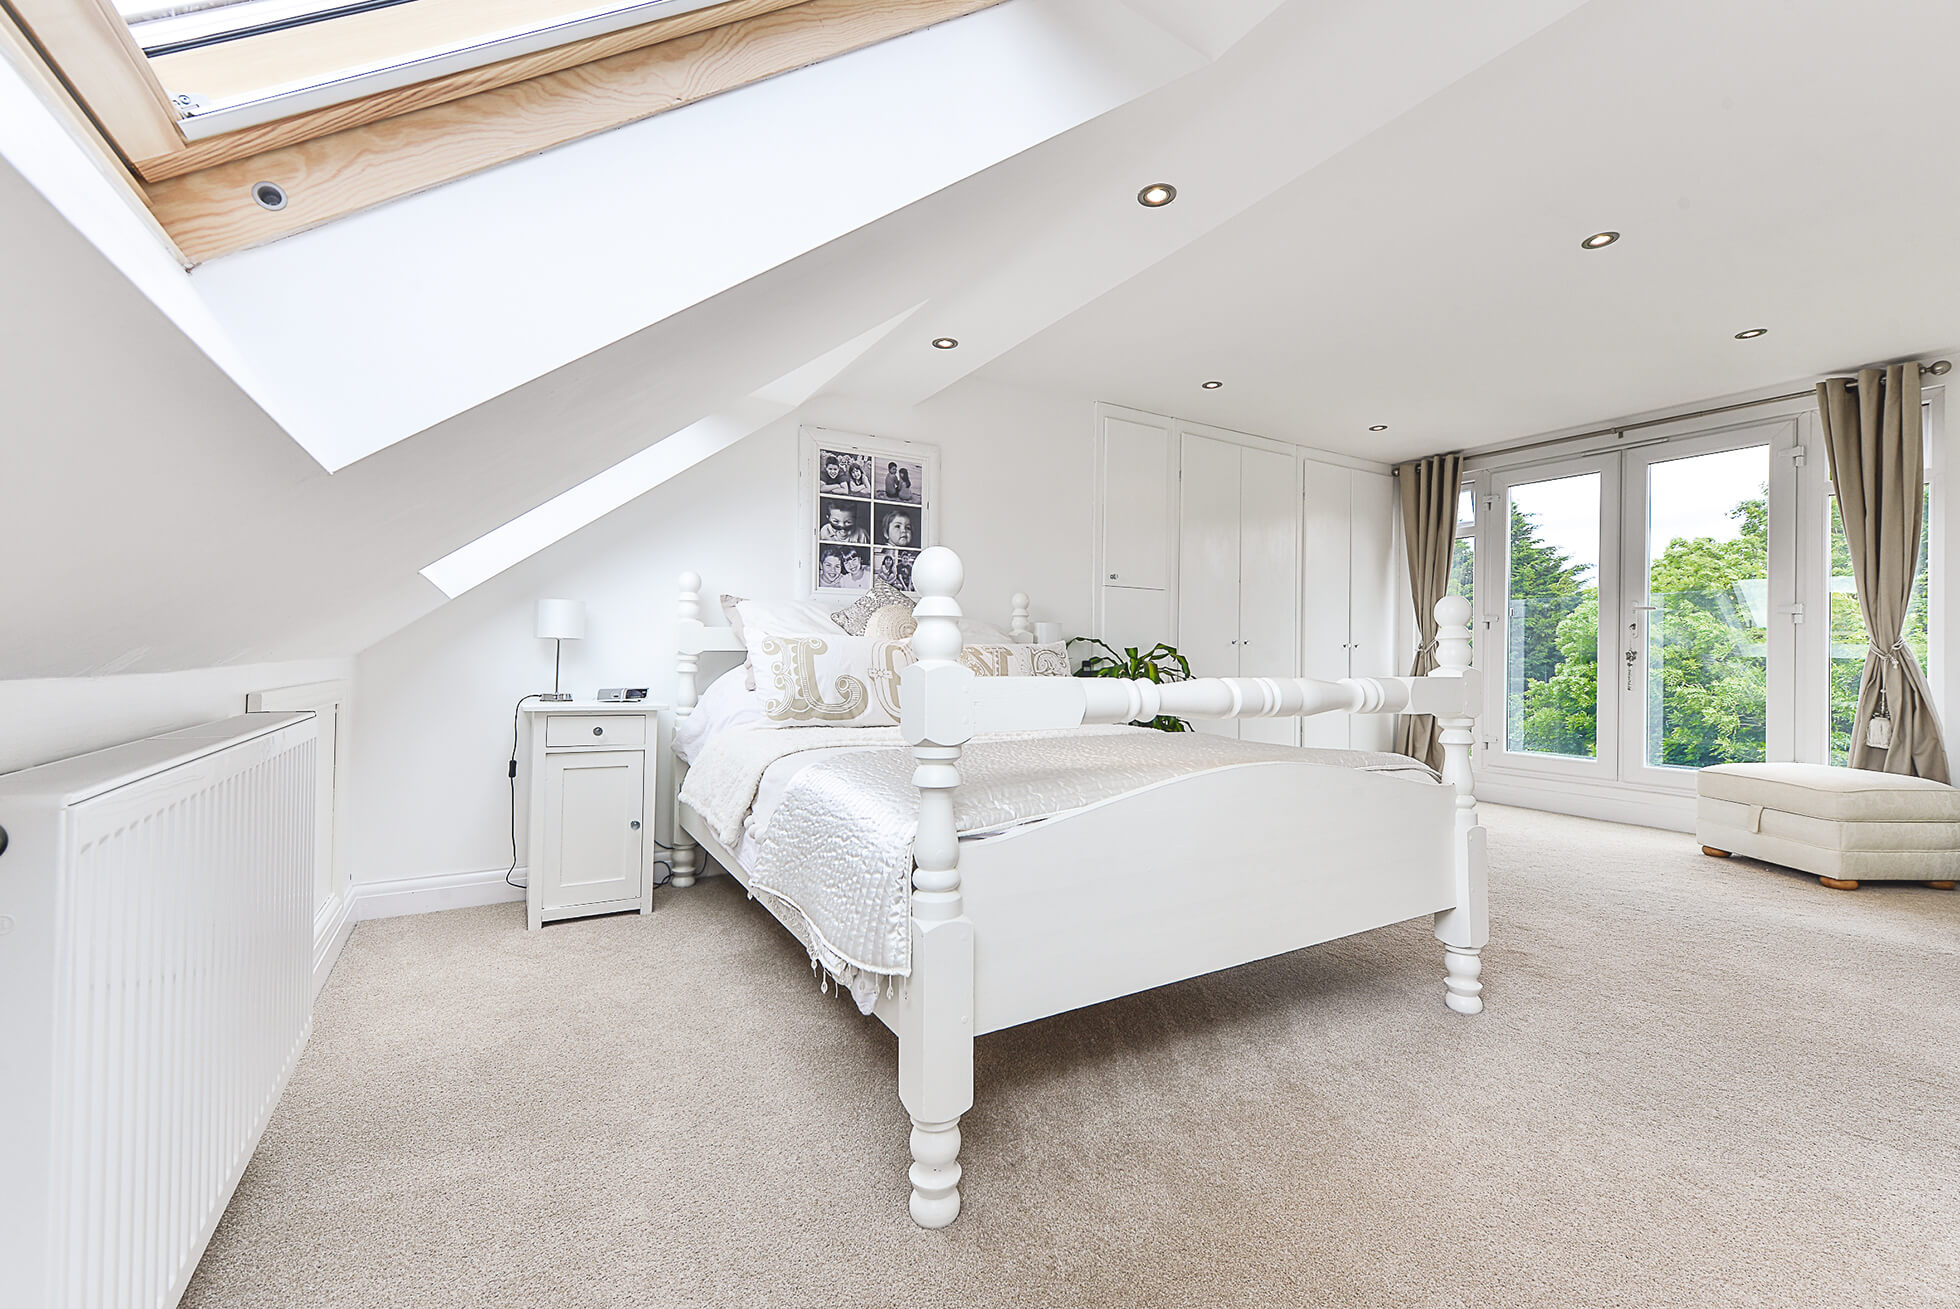 Do you have a question about converting your Loft in Redbourn? Here are the most popular questions asked by our clients.